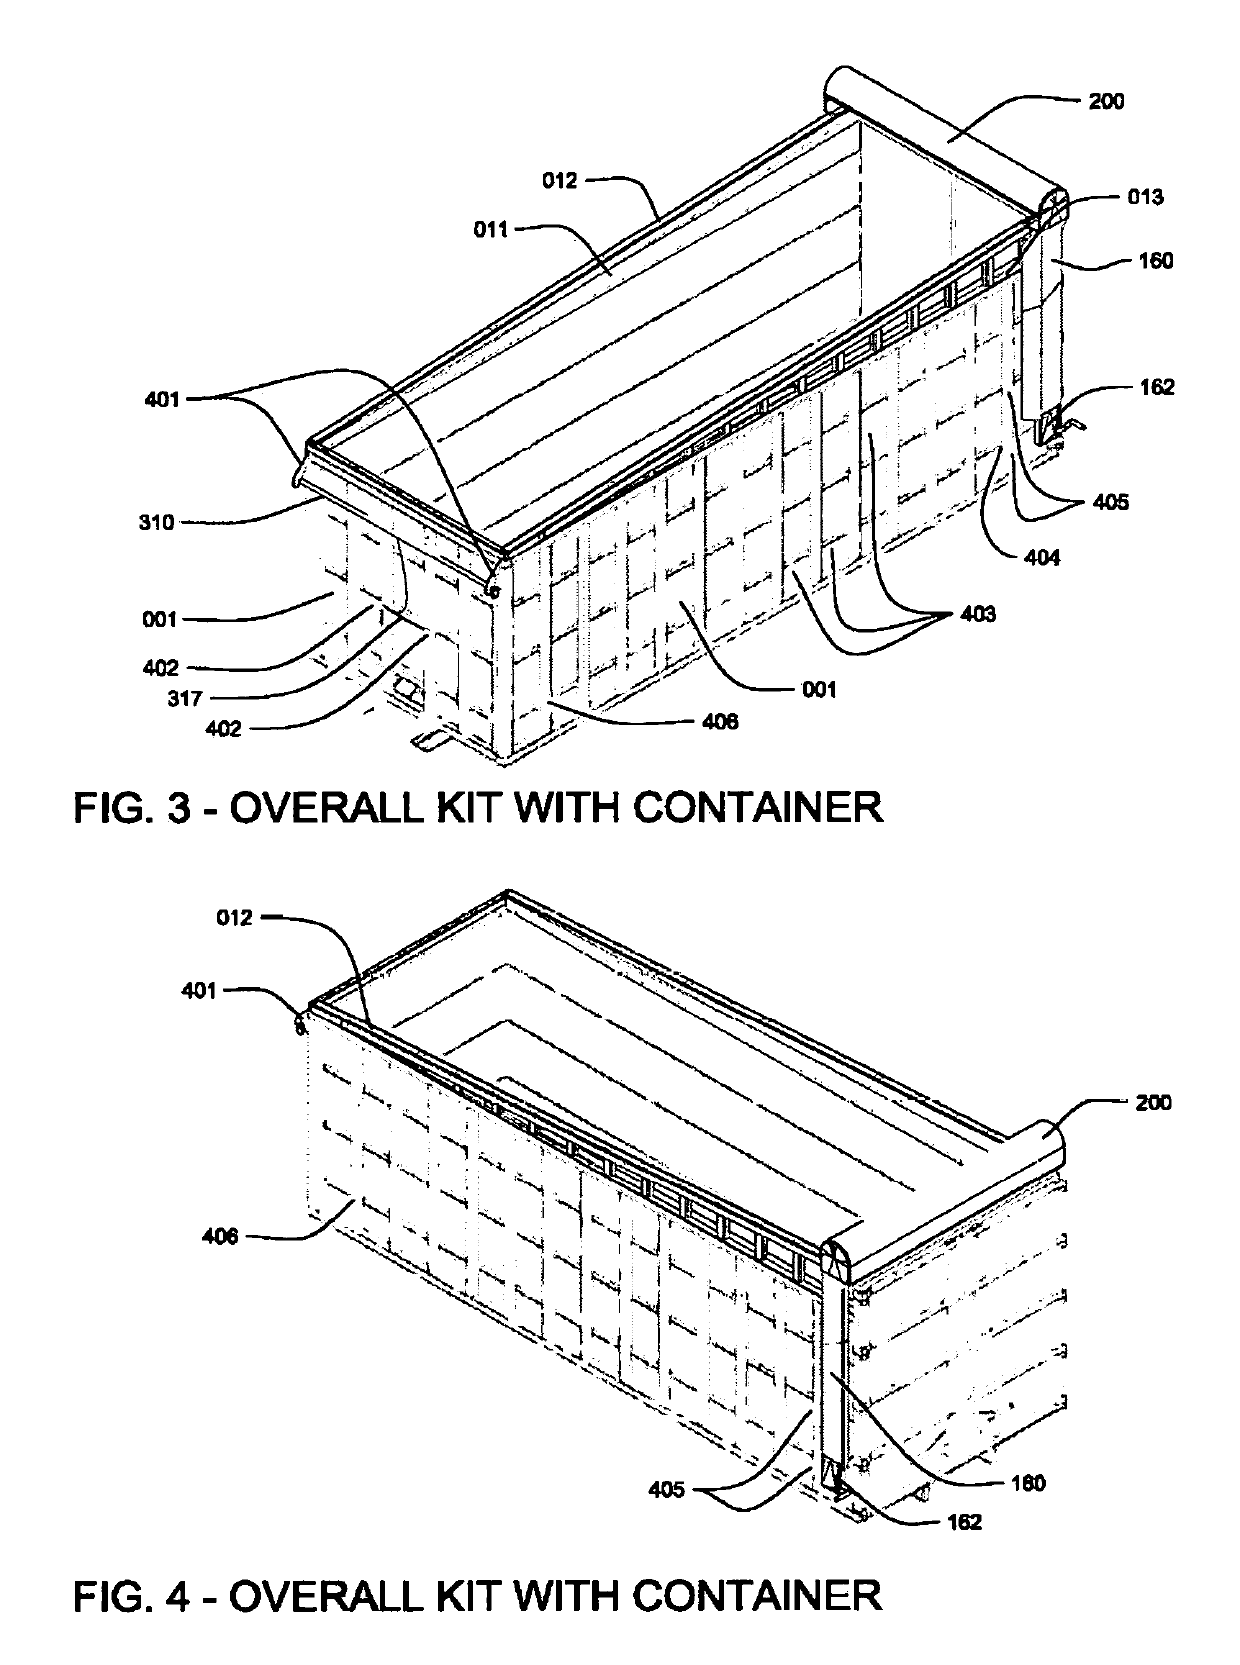 Retractable Fabric Cover for Rectangular Containers